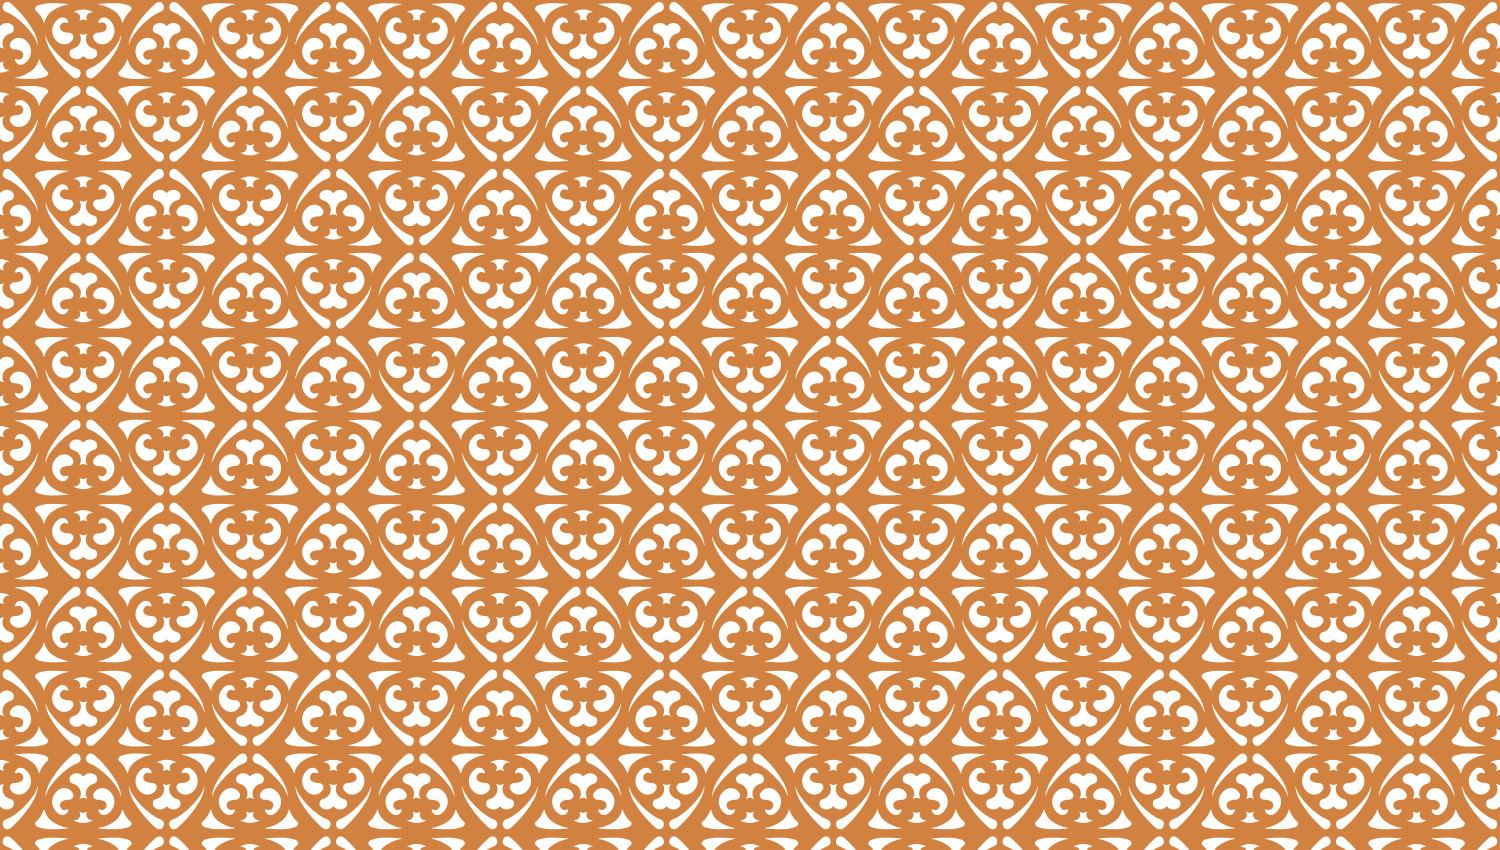 Parasoleil™ Flanigan© pattern displayed with a ochre color overlay